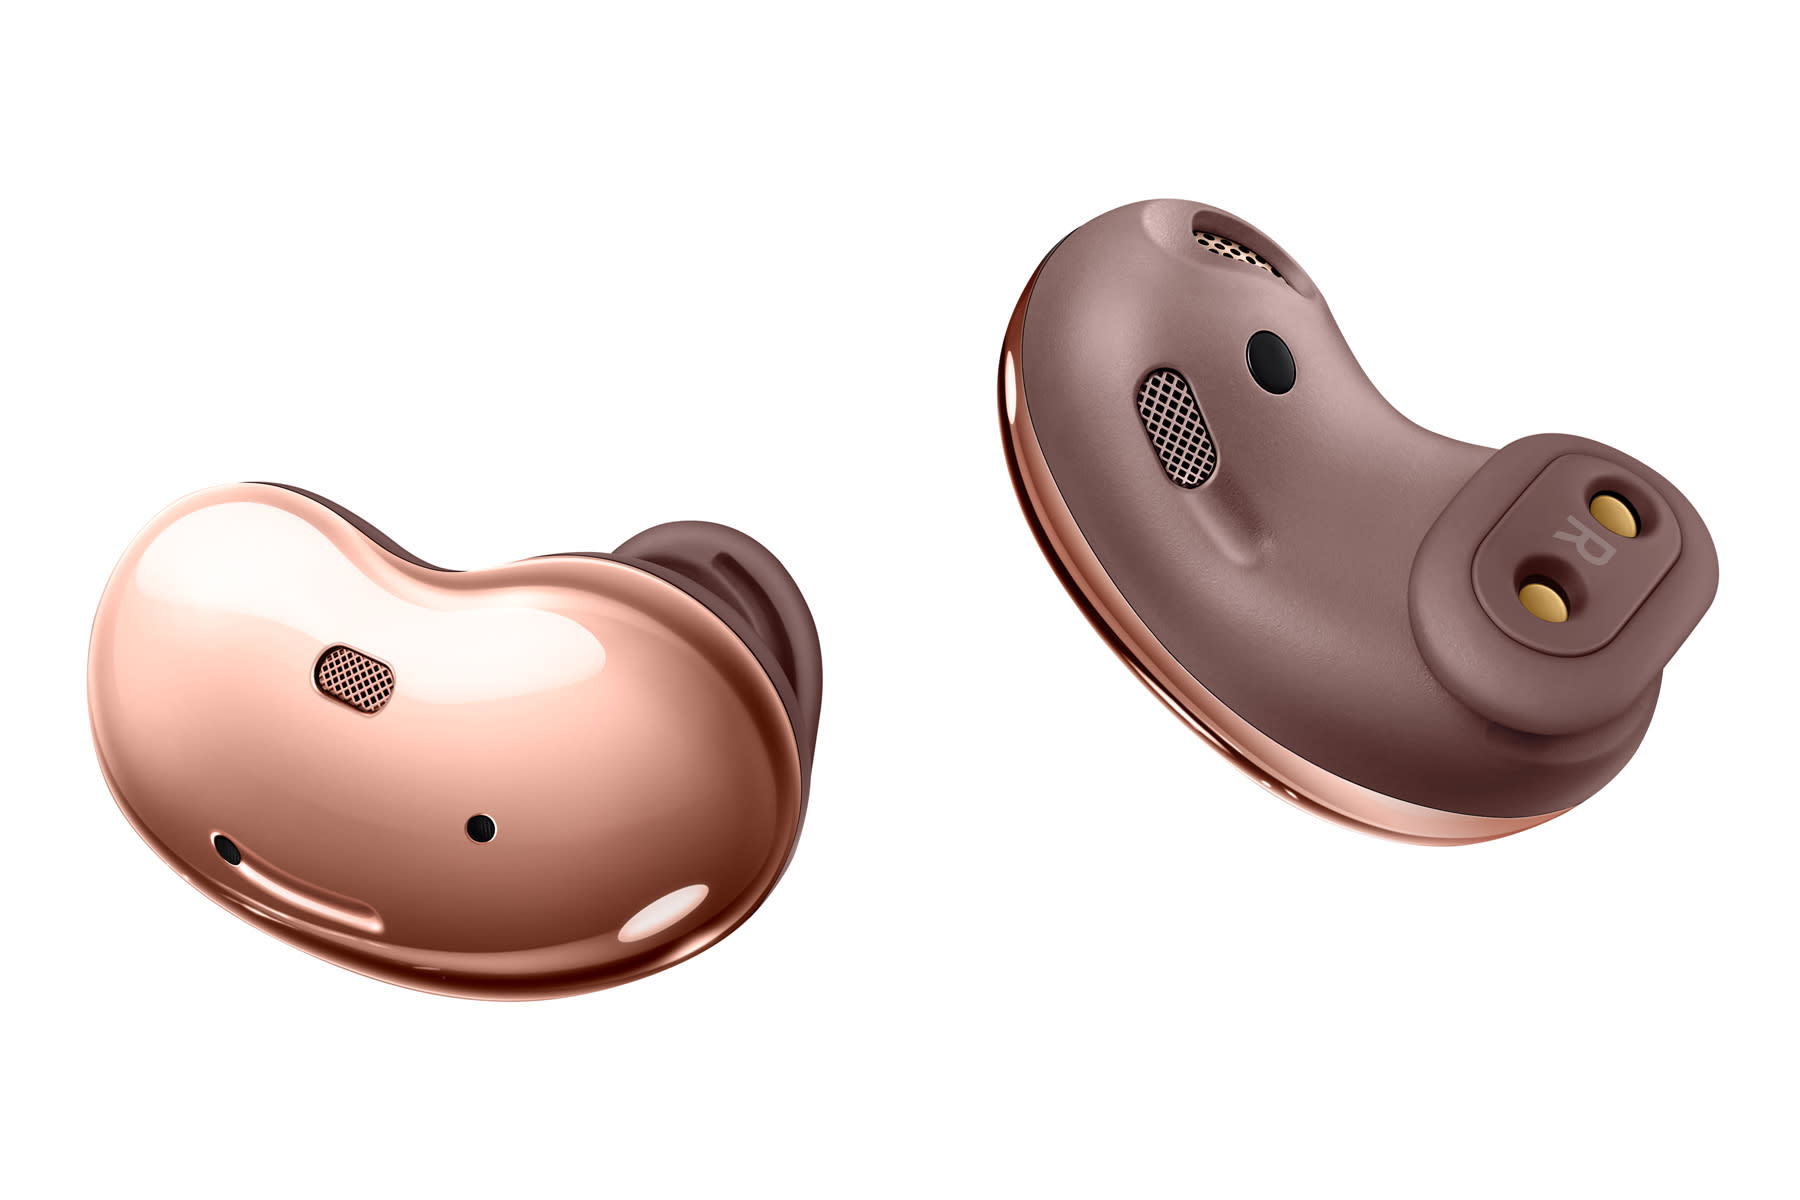 Samsung’s Galaxy Buds Live offer premium earbud features without the